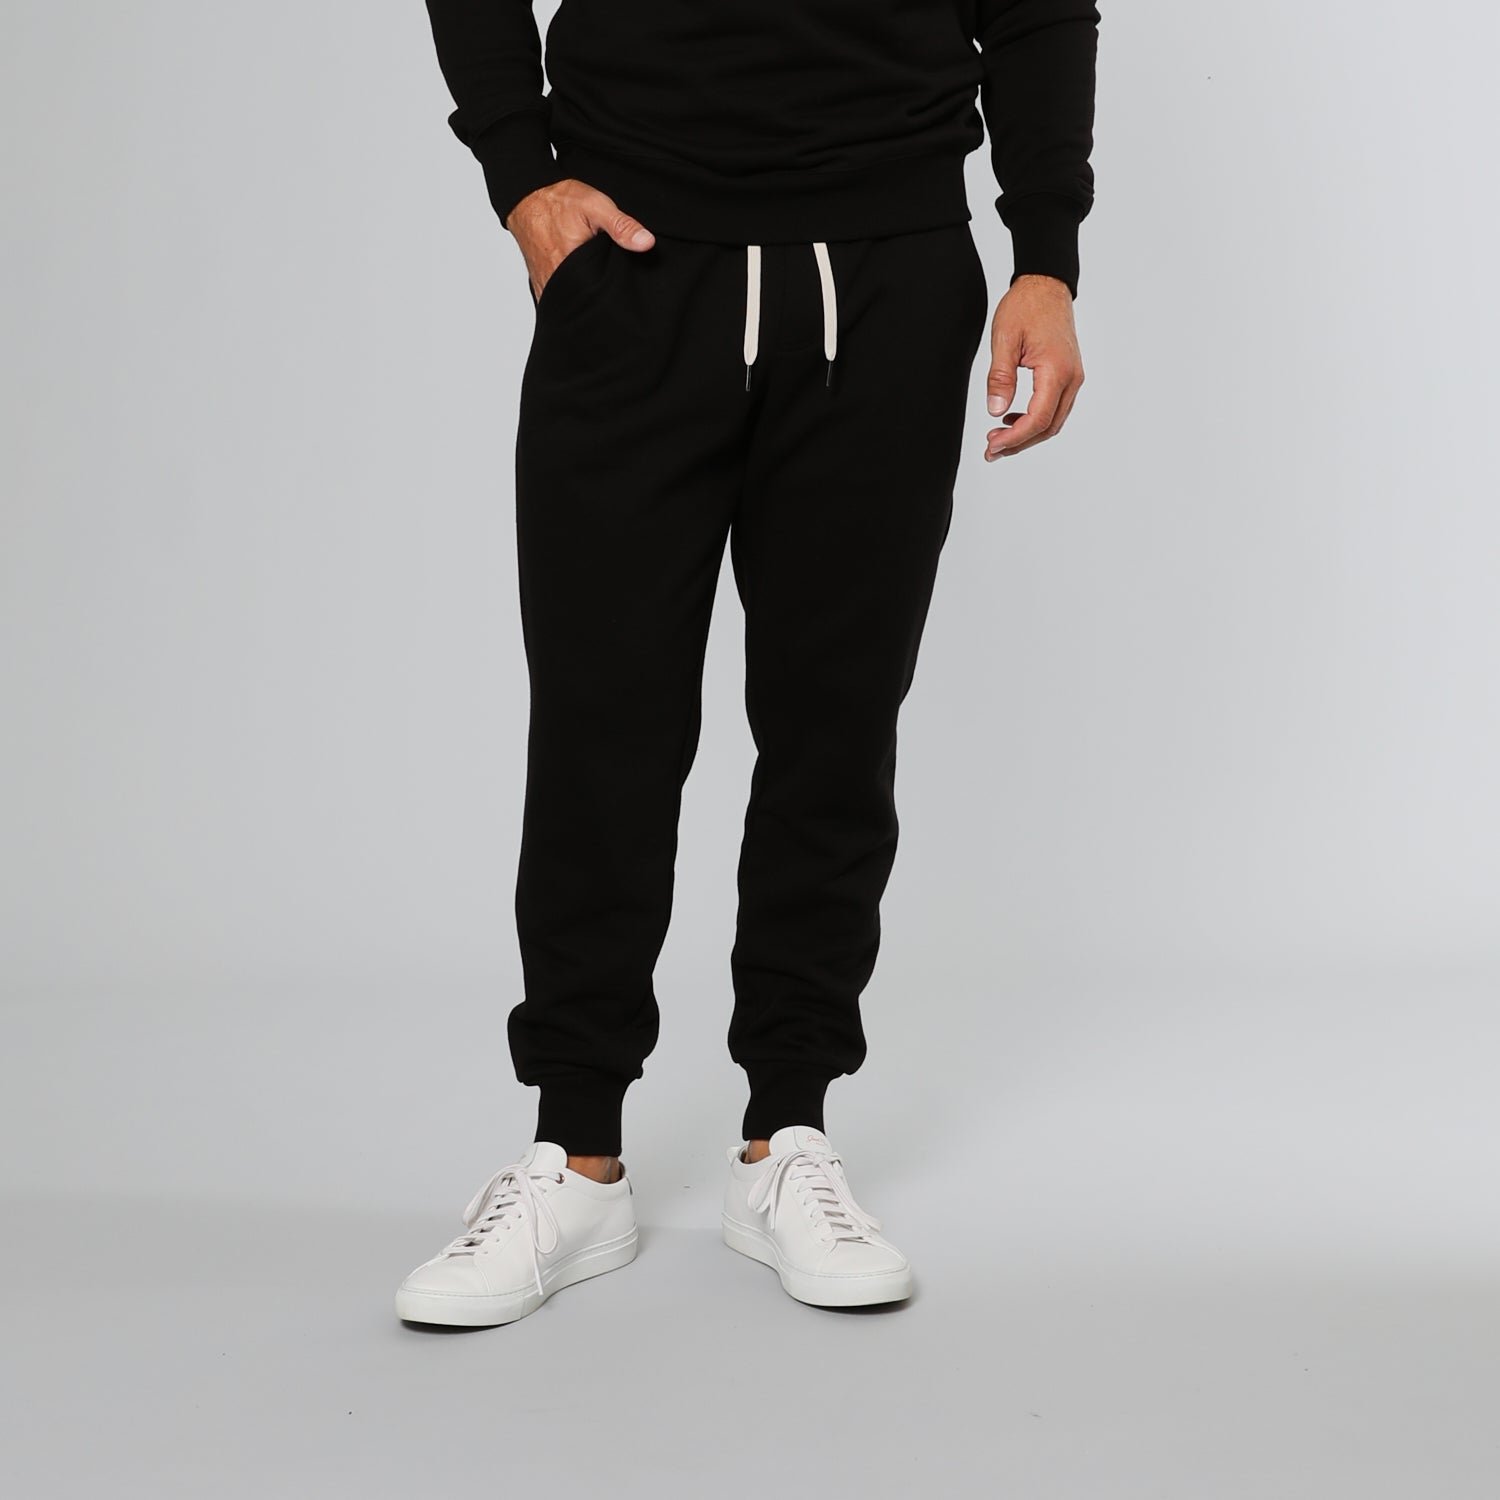 Black Fleece Pullover Hoodie and Jogger Set